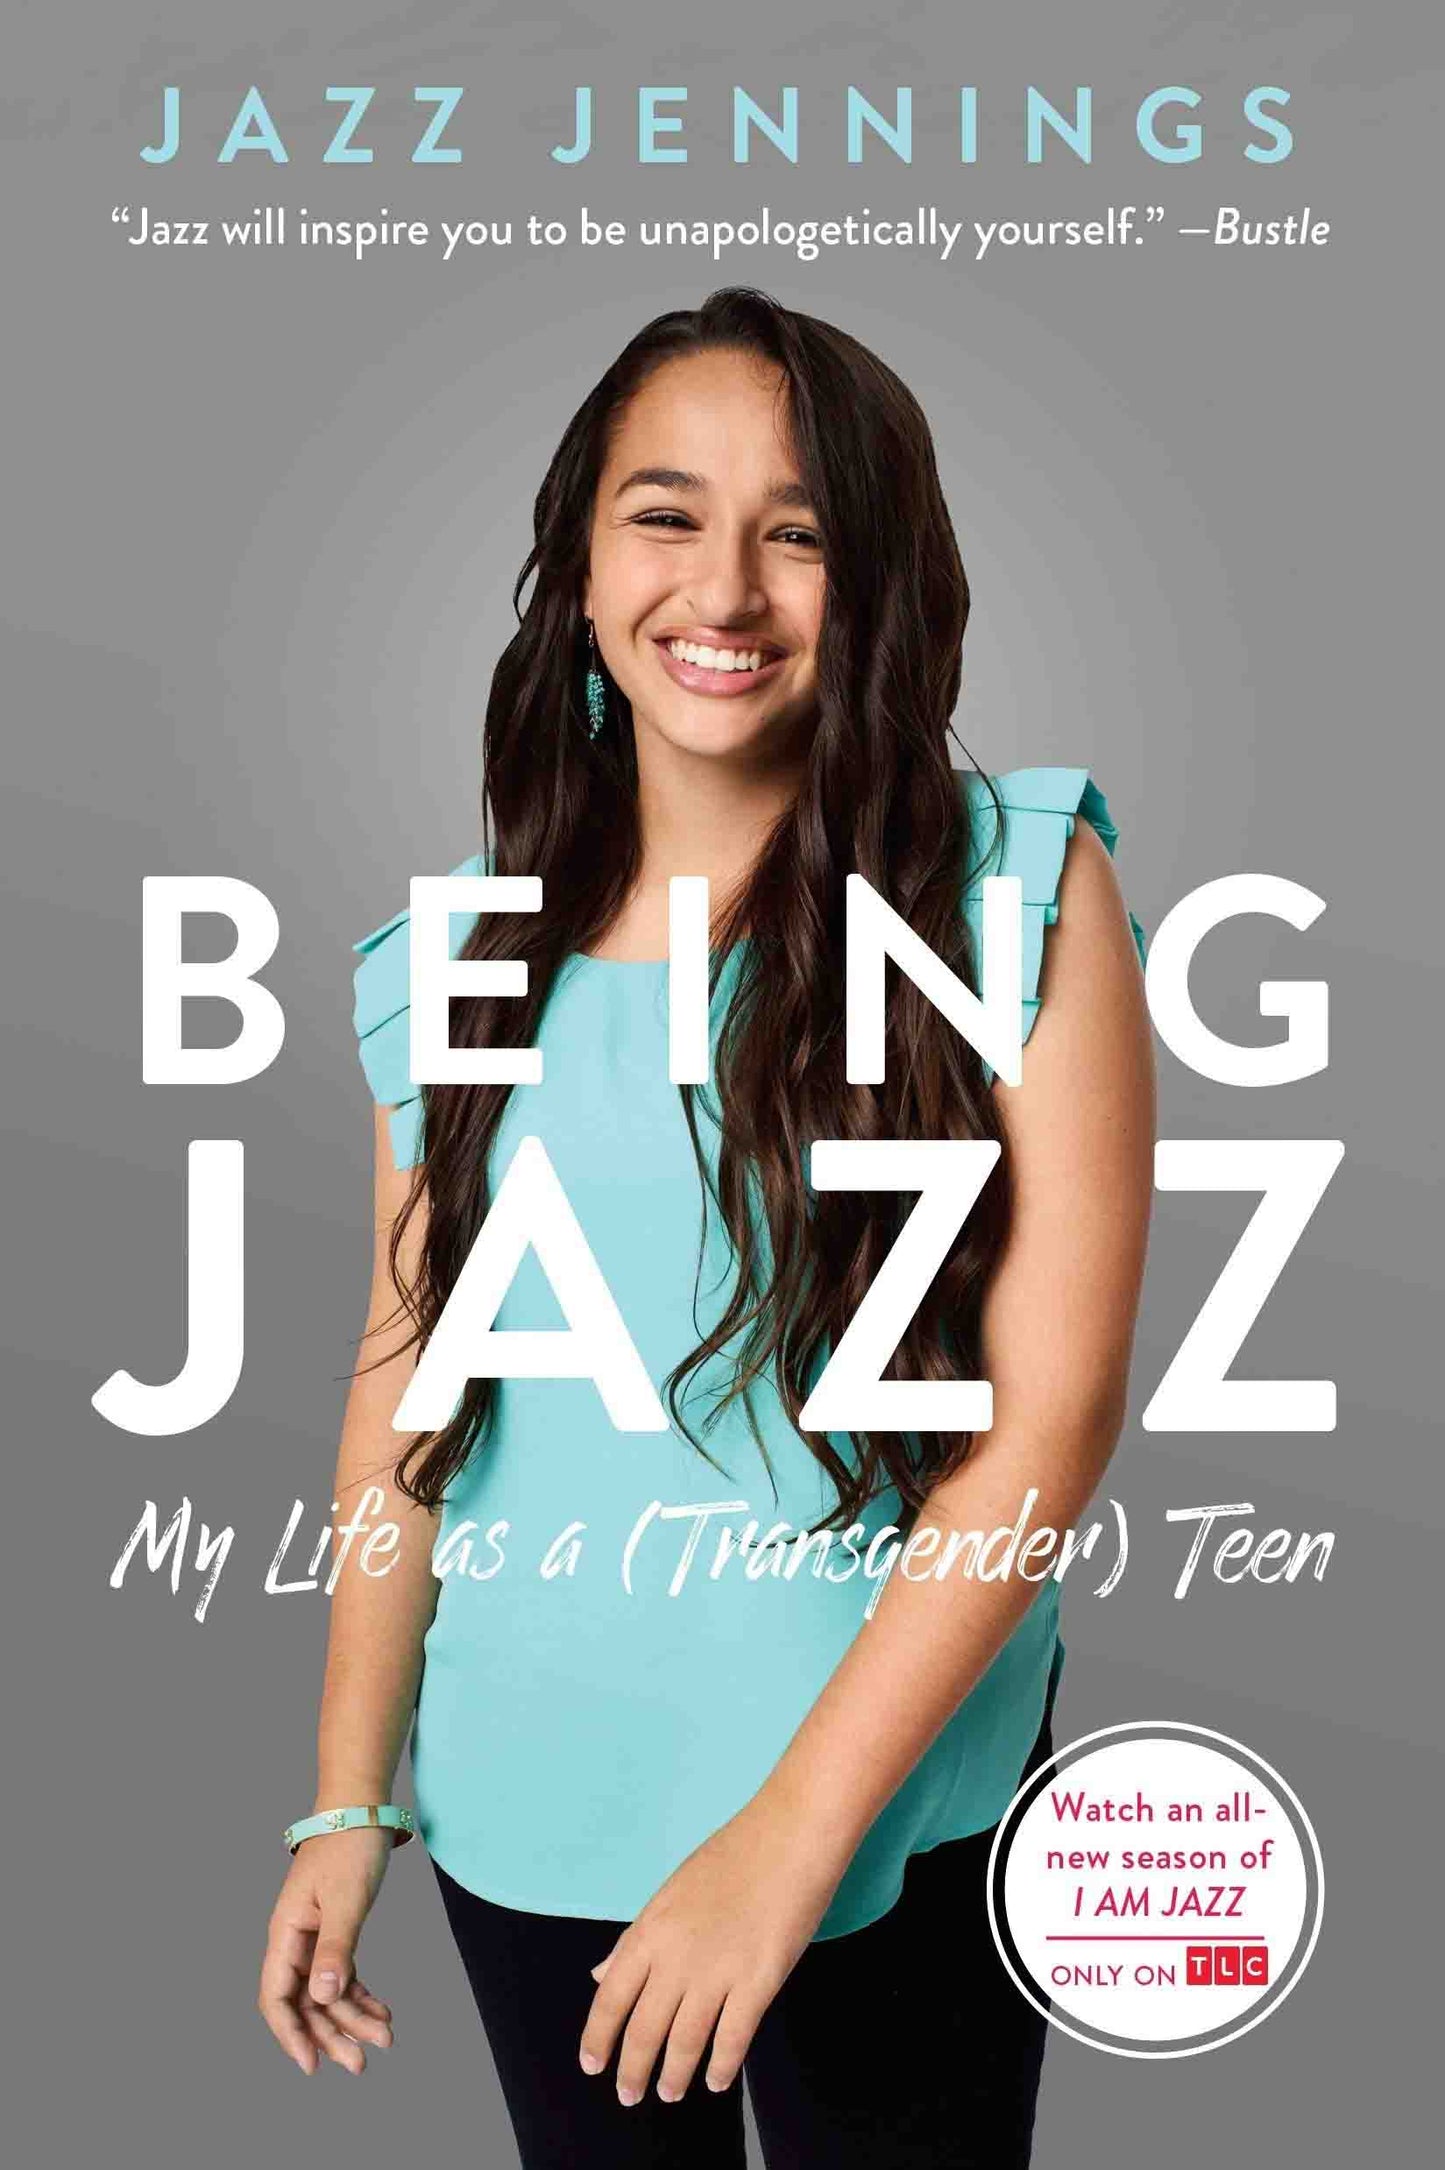 The front cover of Being Jazz: My Life as a (Transgender) Teen - Jazz Jennings.